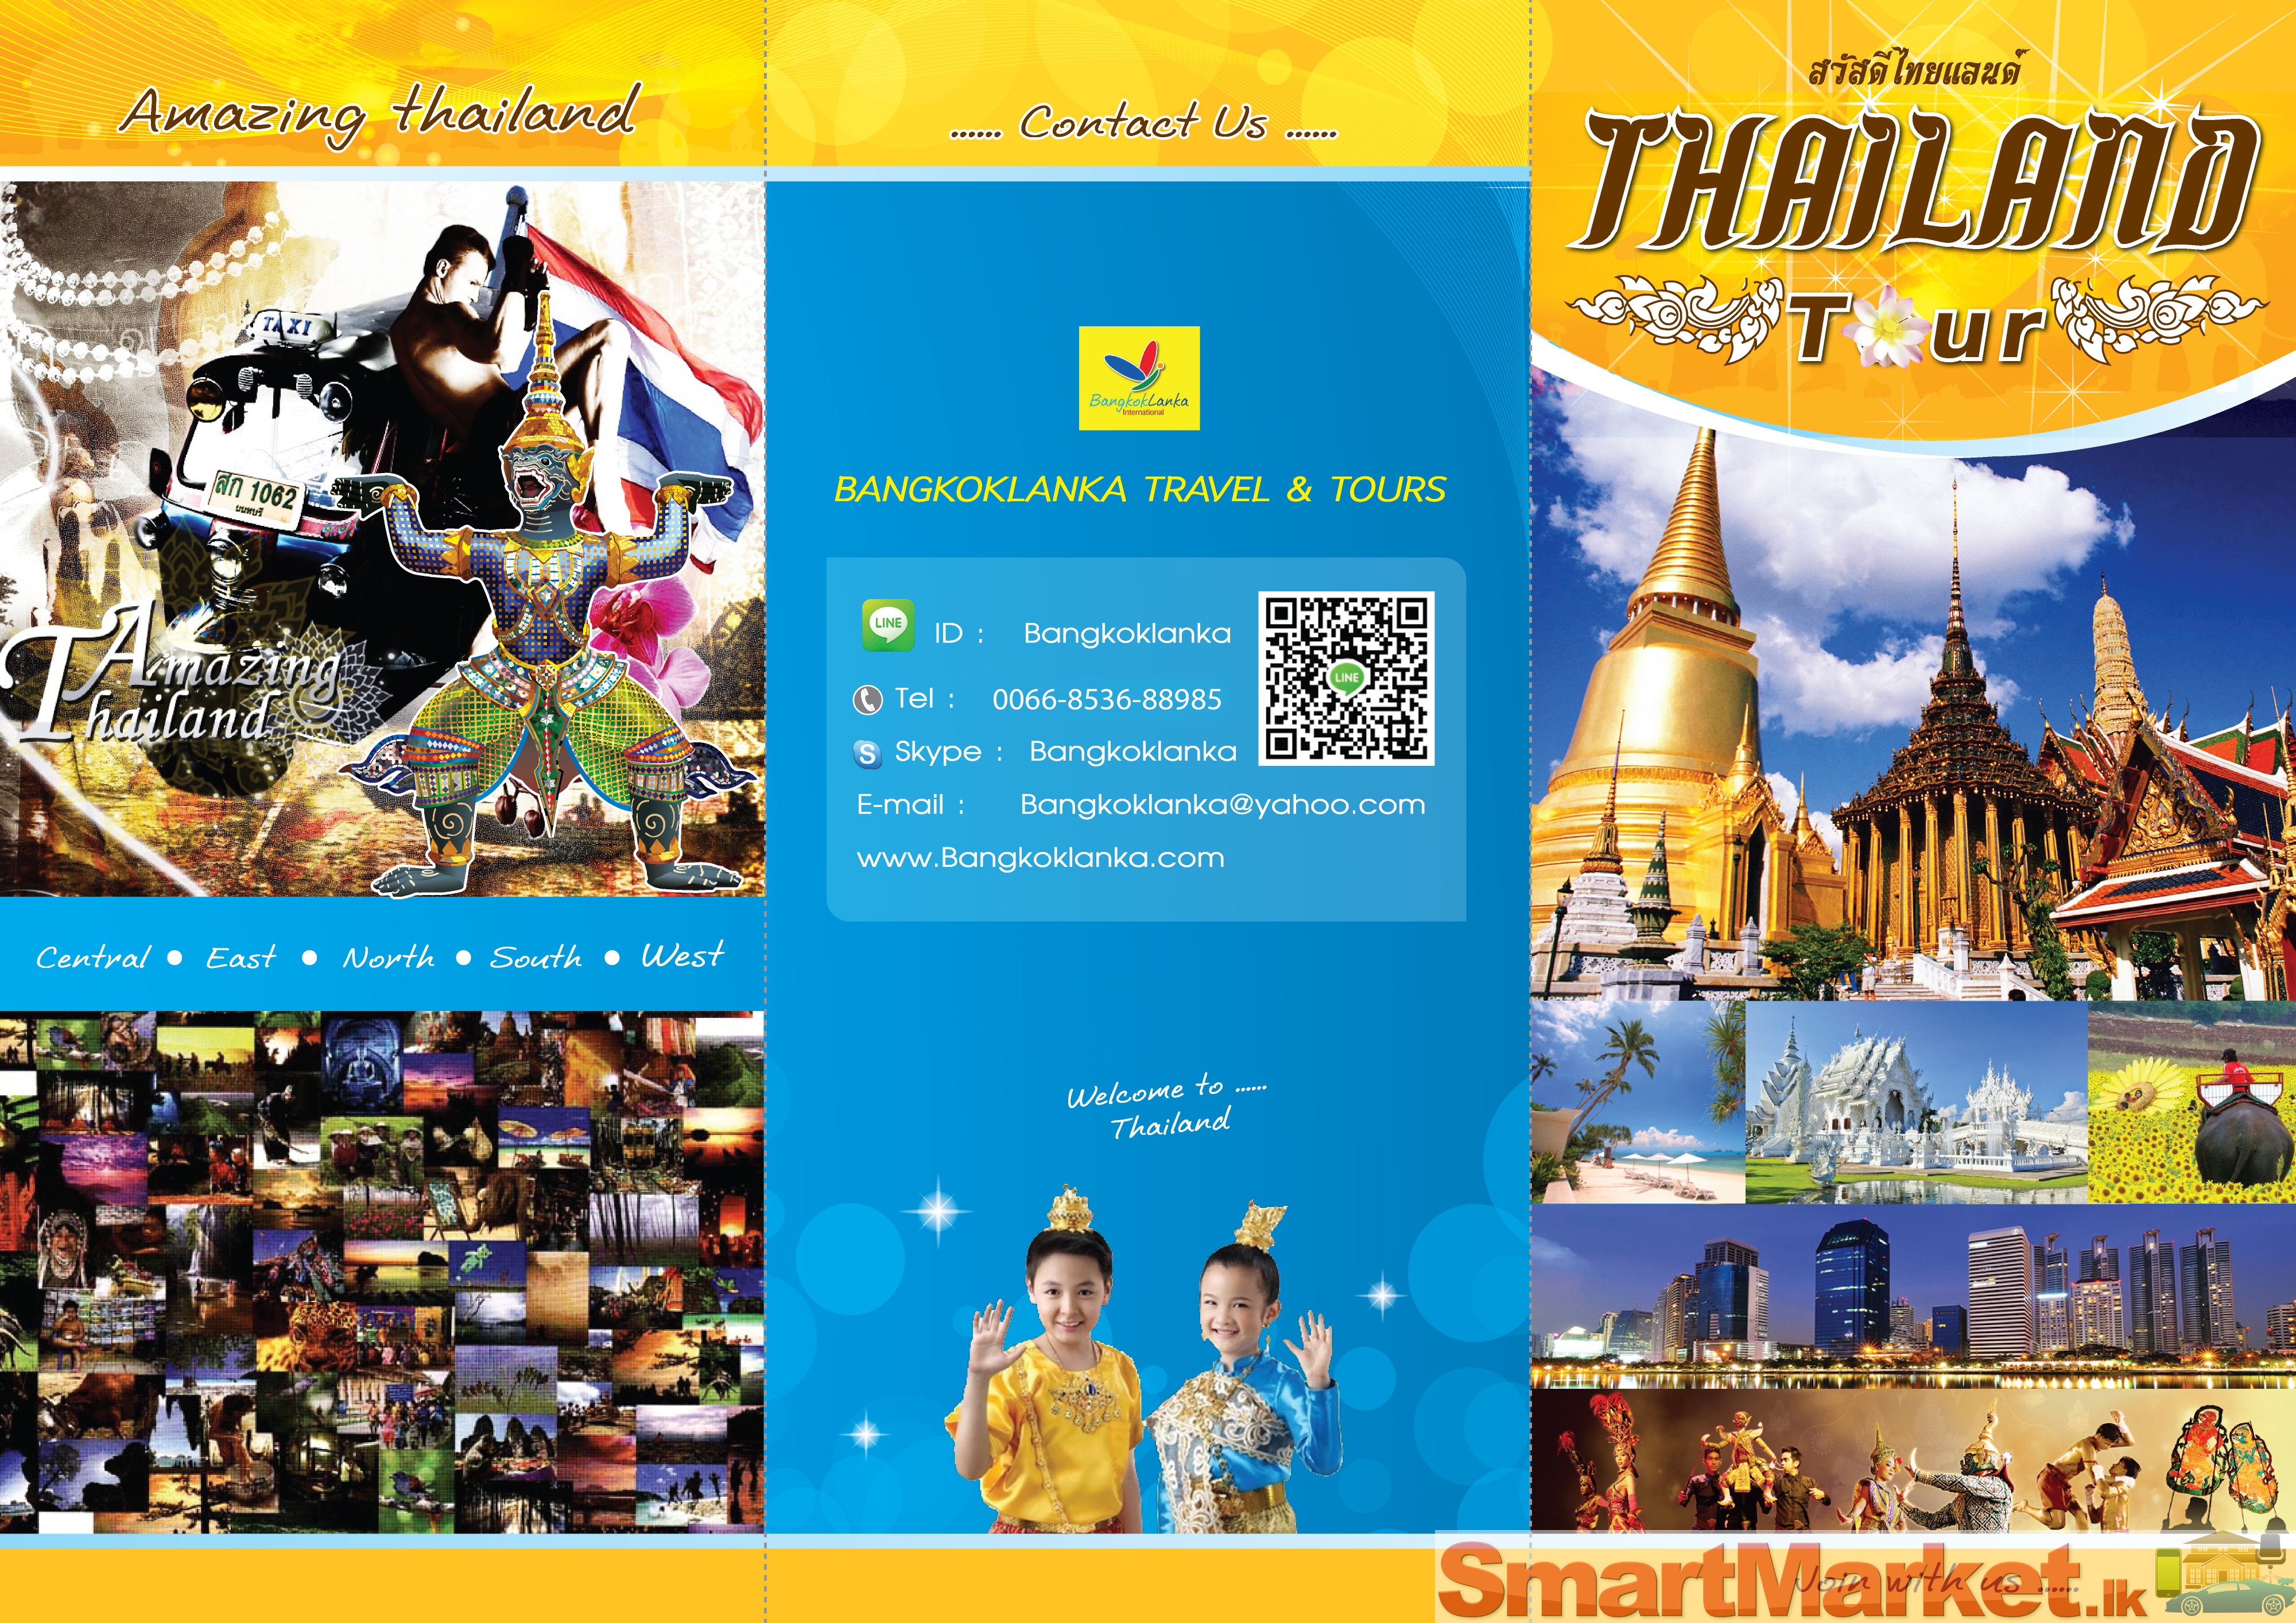 Tour of Thailand 6 Night and 7 days 63,00 Rs.